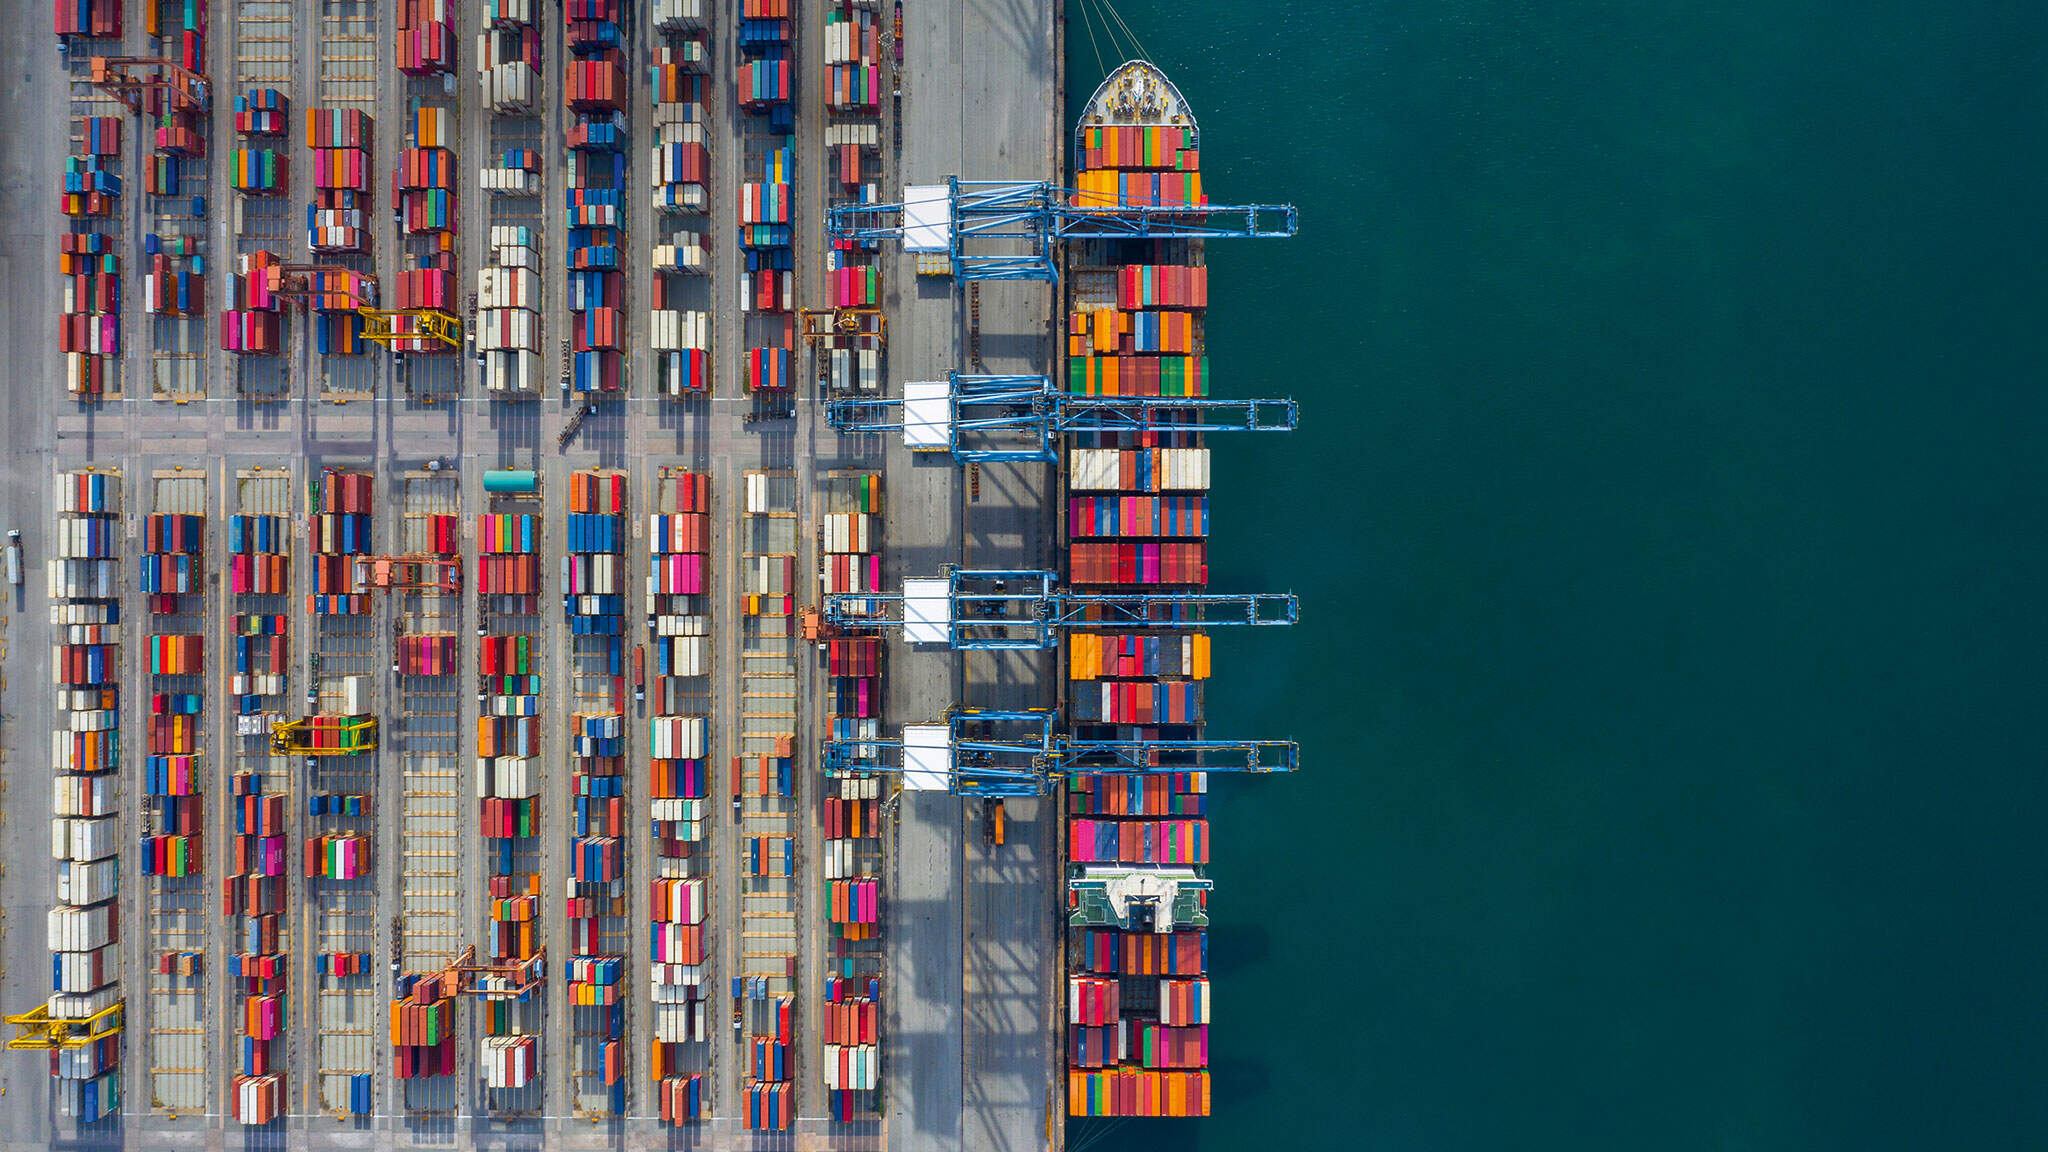 Sea freight connects different worlds